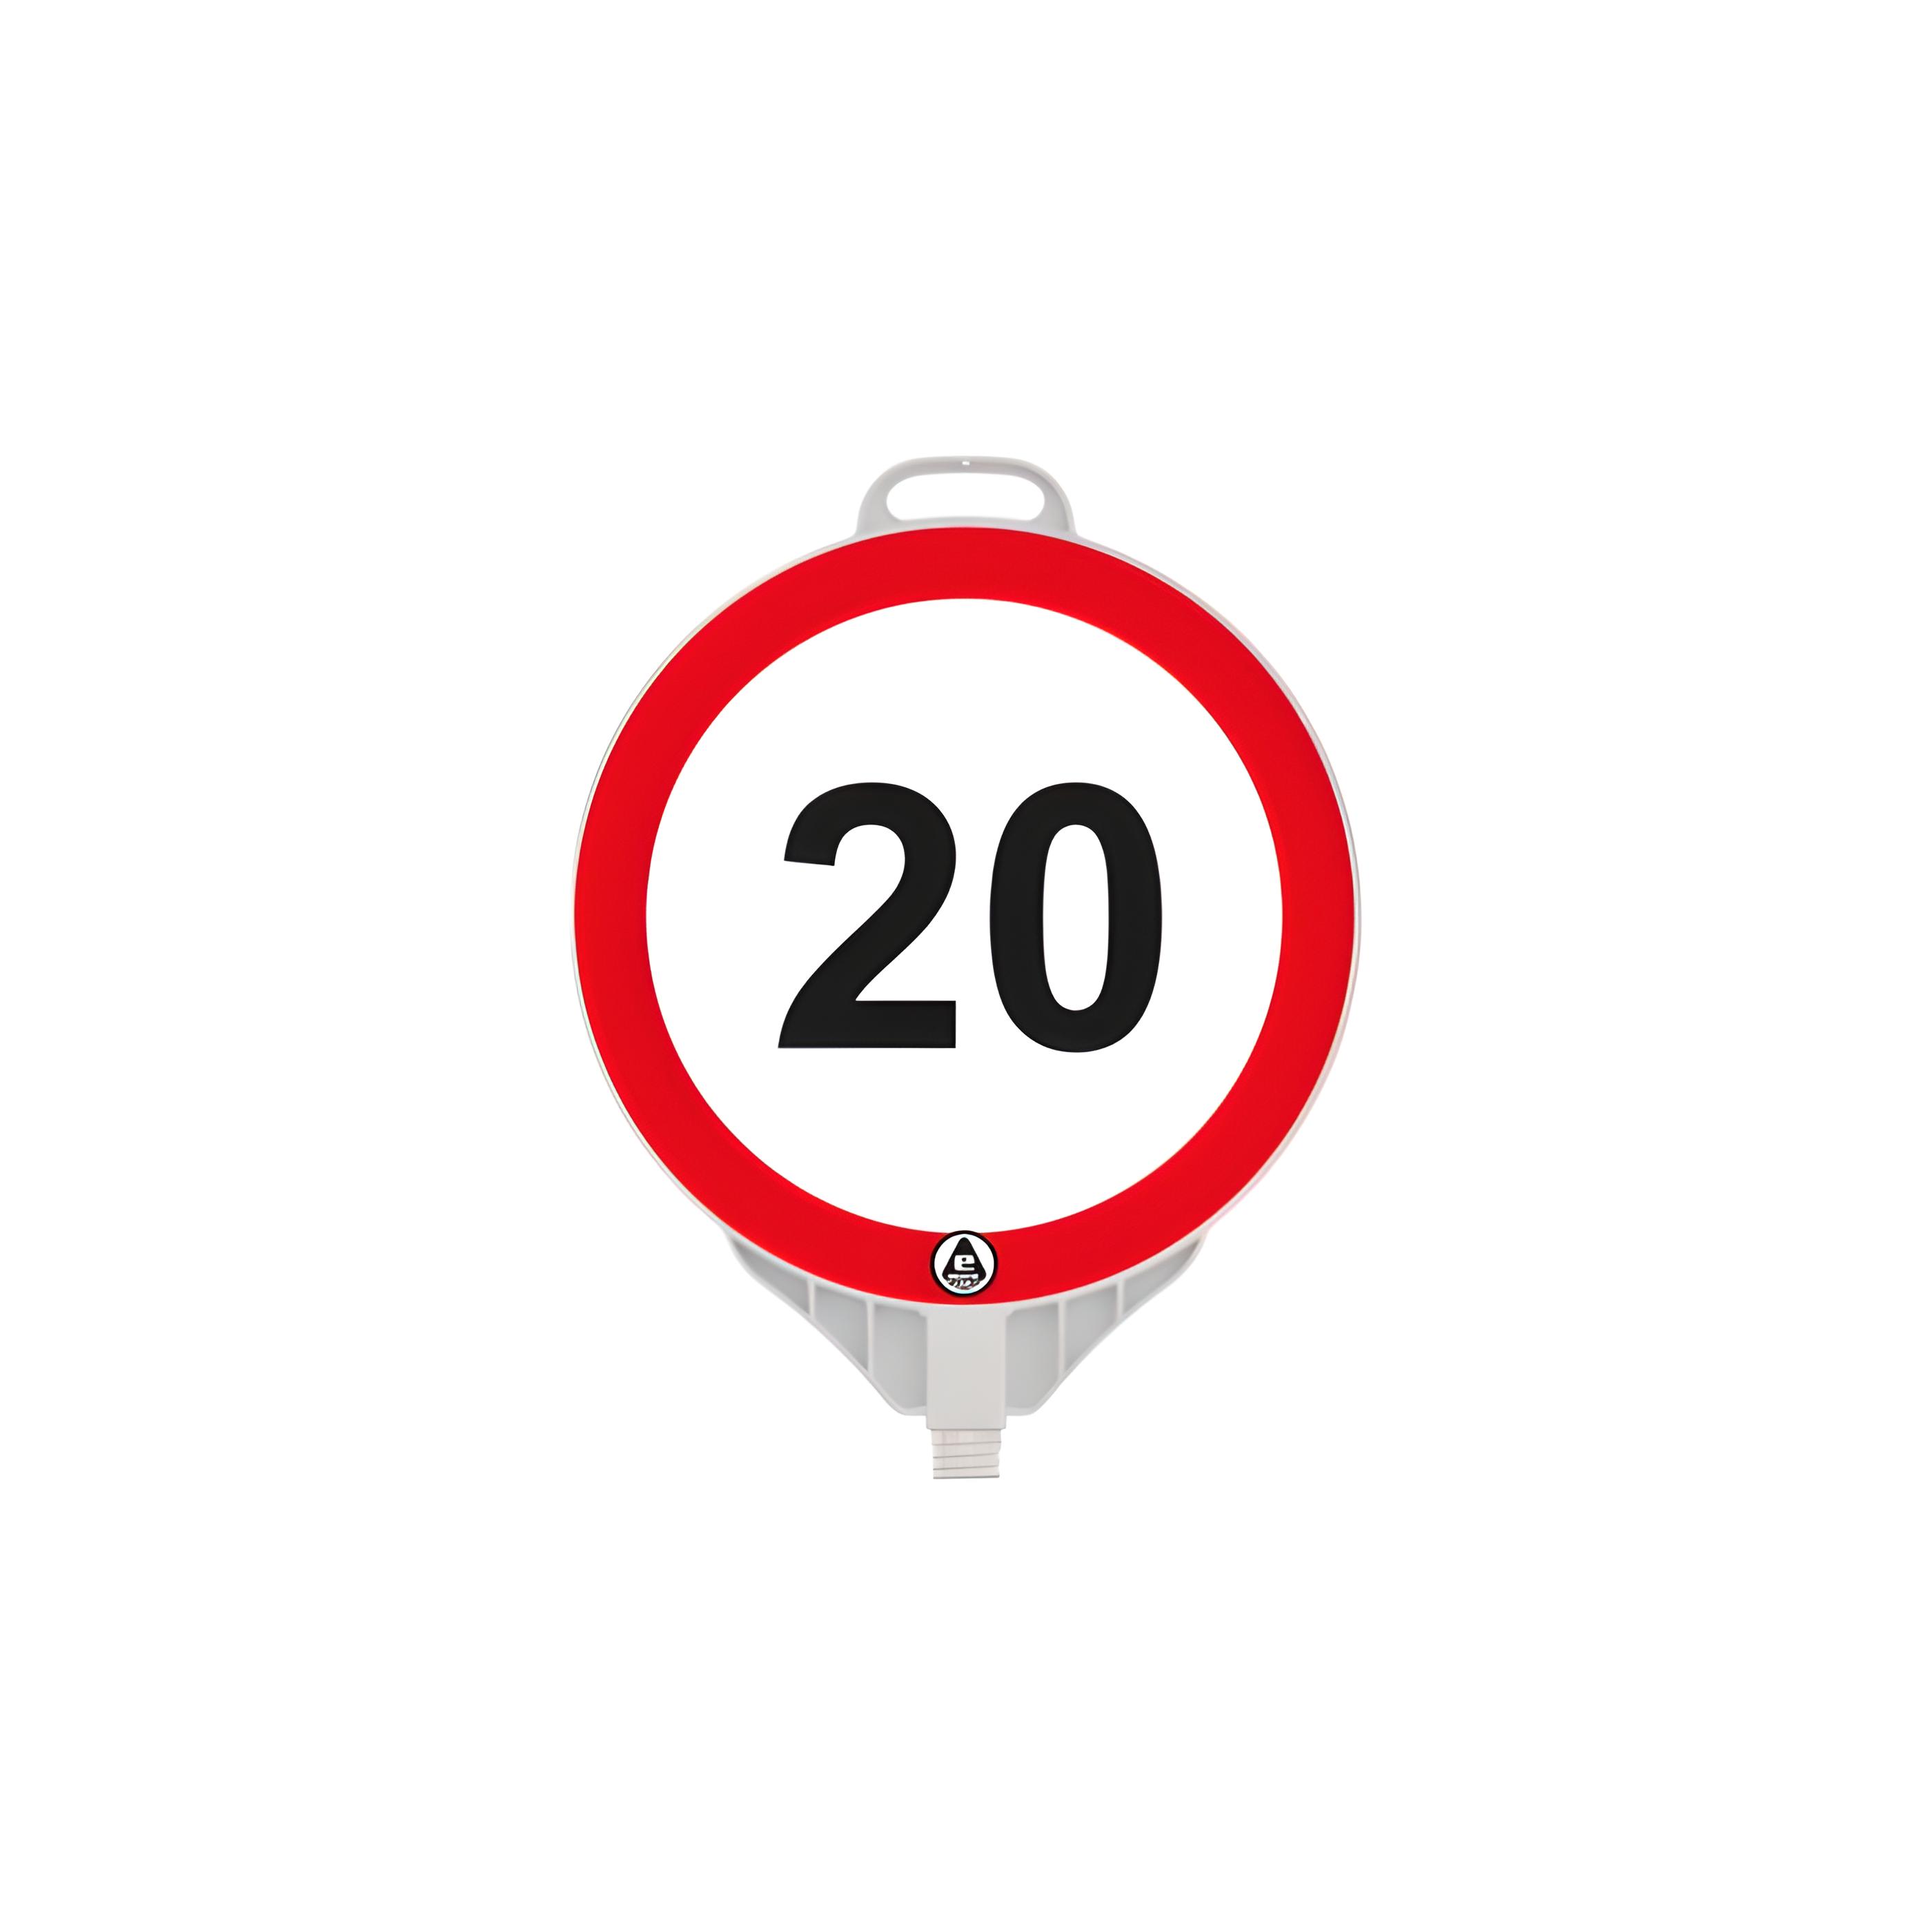 233 A R TRAFFIC SIGN BOARDS